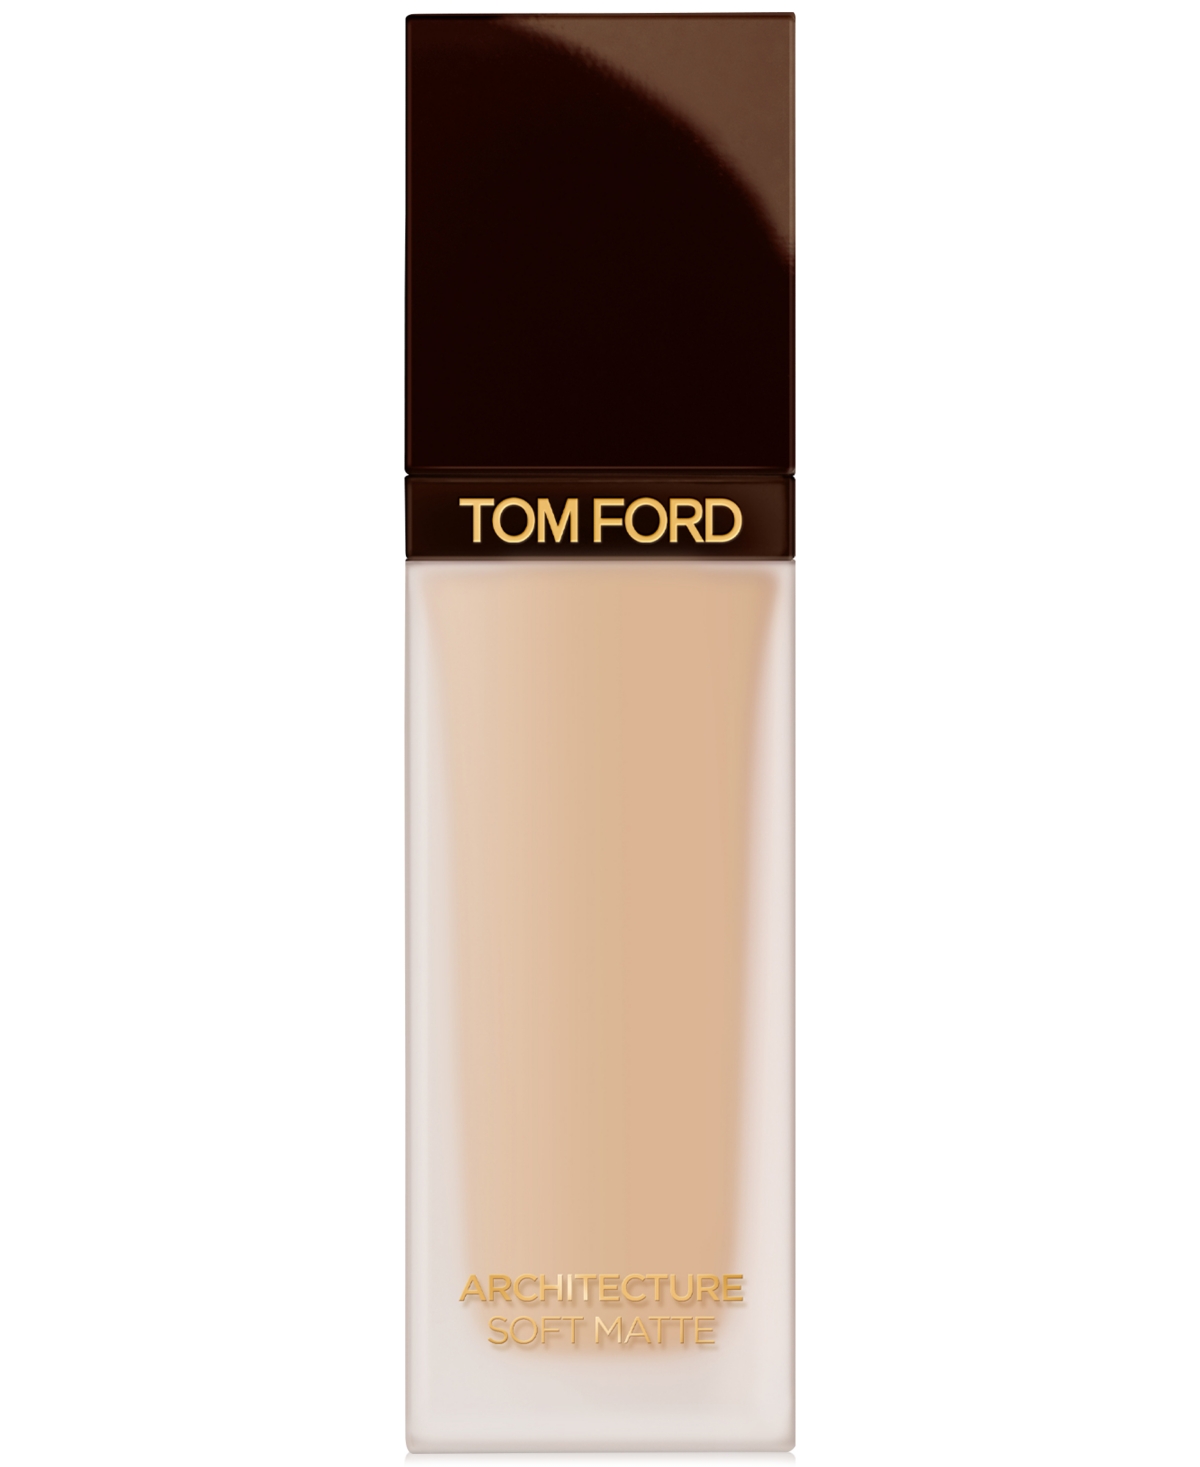 Tom Ford Architecture Soft Matte Blurring Foundation In White